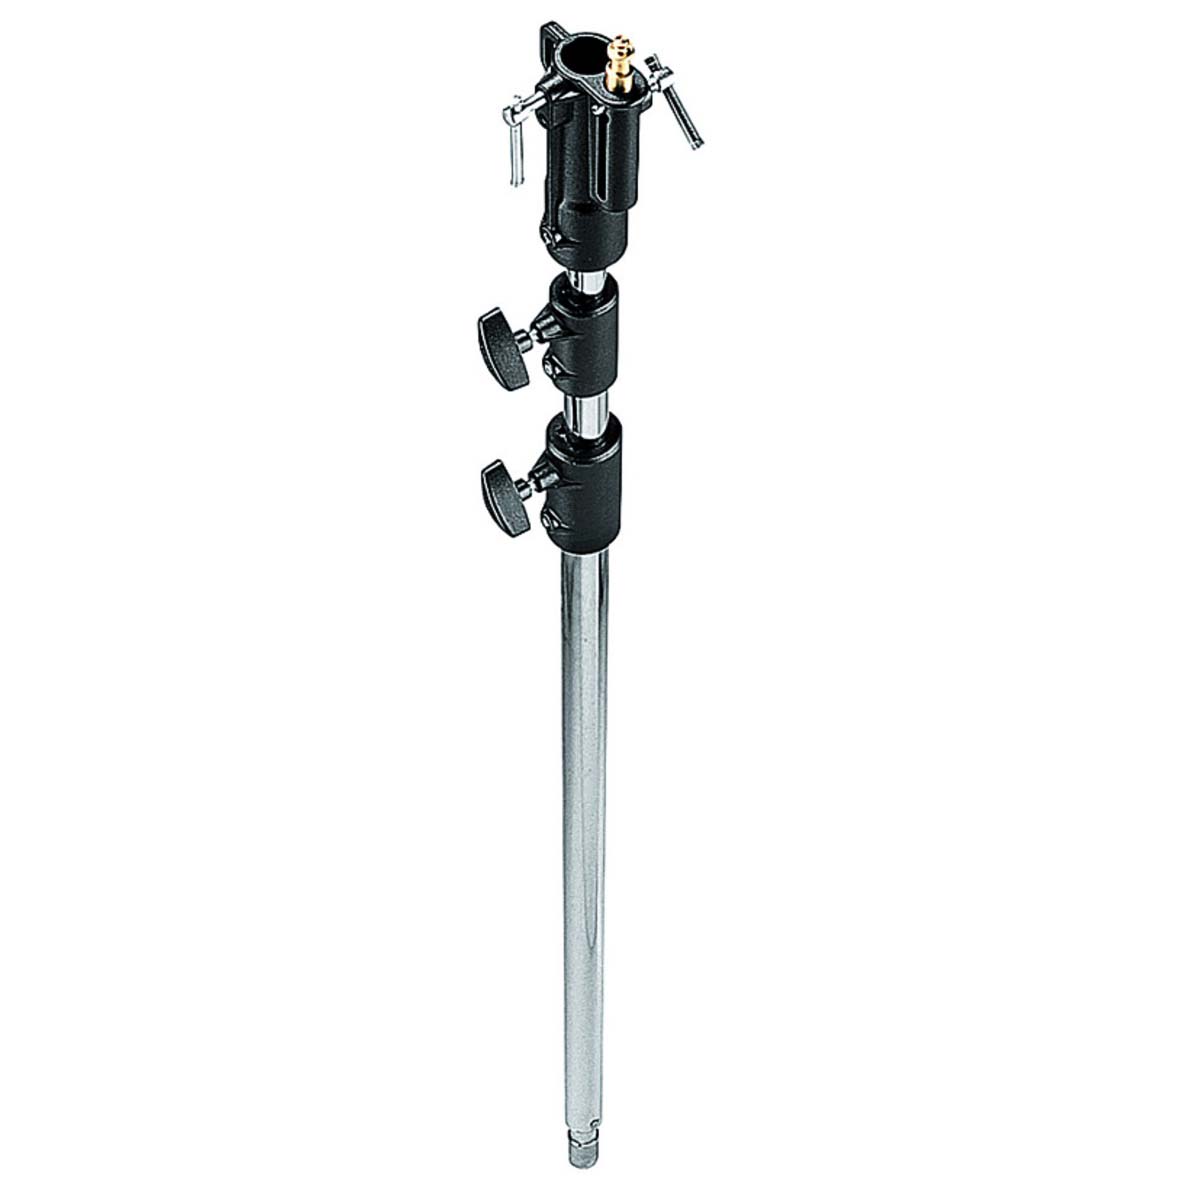 EXTENSION MANFROTTO 146CS